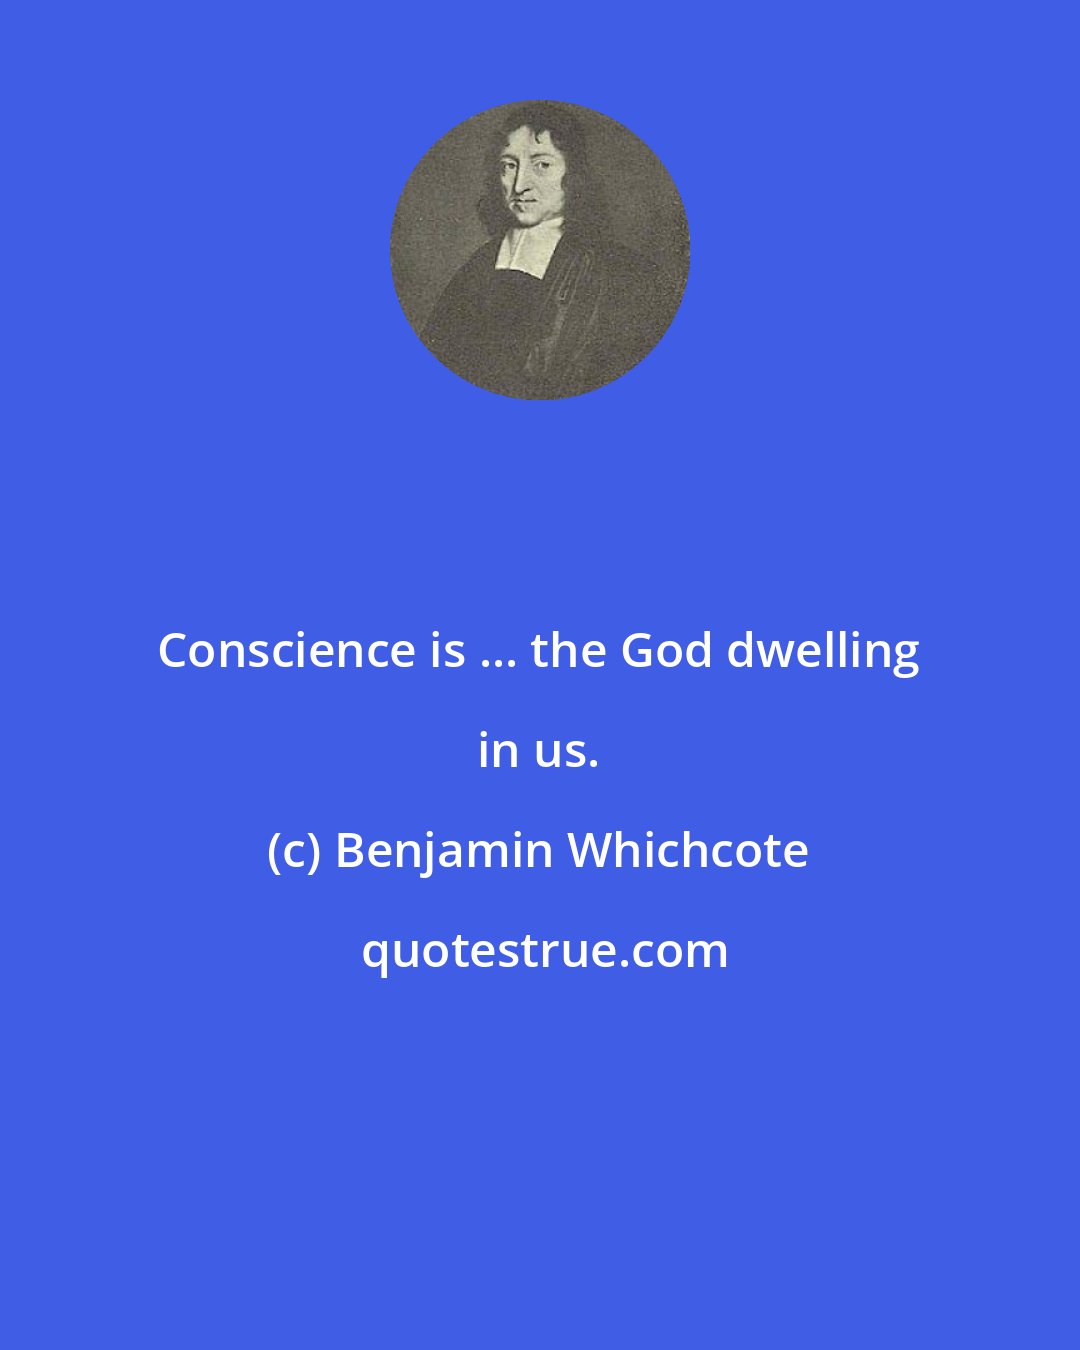 Benjamin Whichcote: Conscience is ... the God dwelling in us.